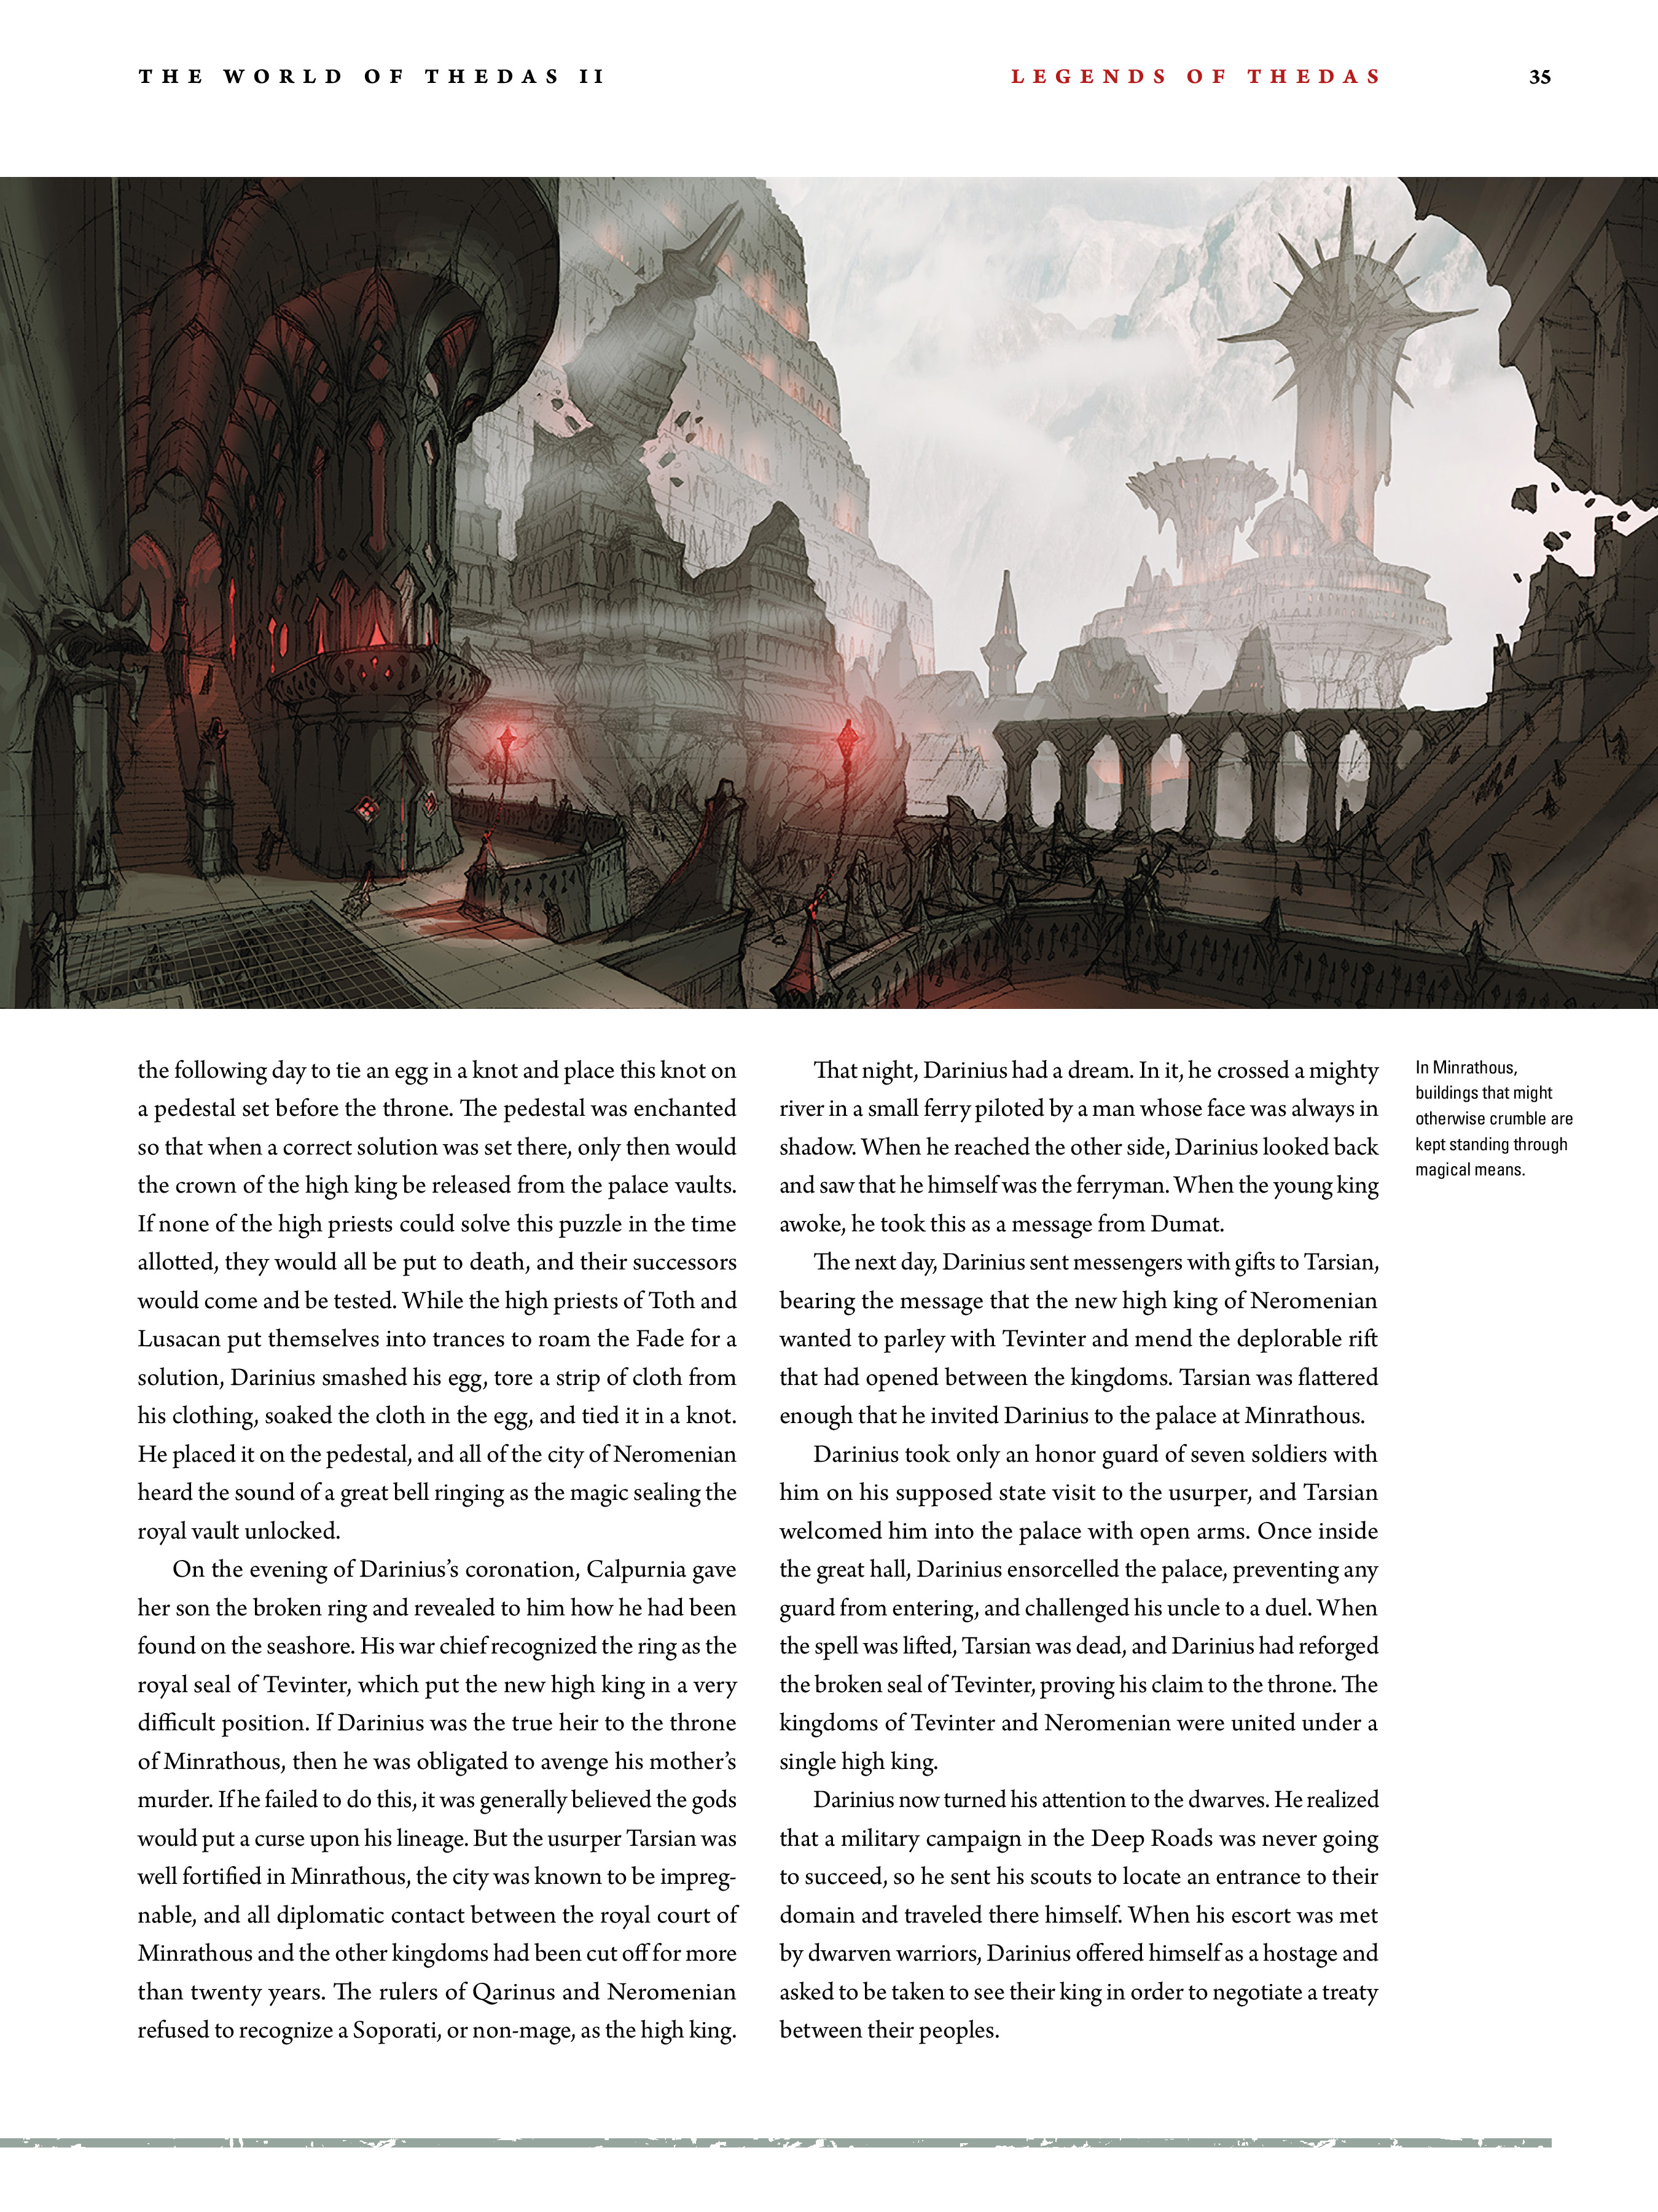 Read online Dragon Age: The World of Thedas comic -  Issue # TPB 2 - 32